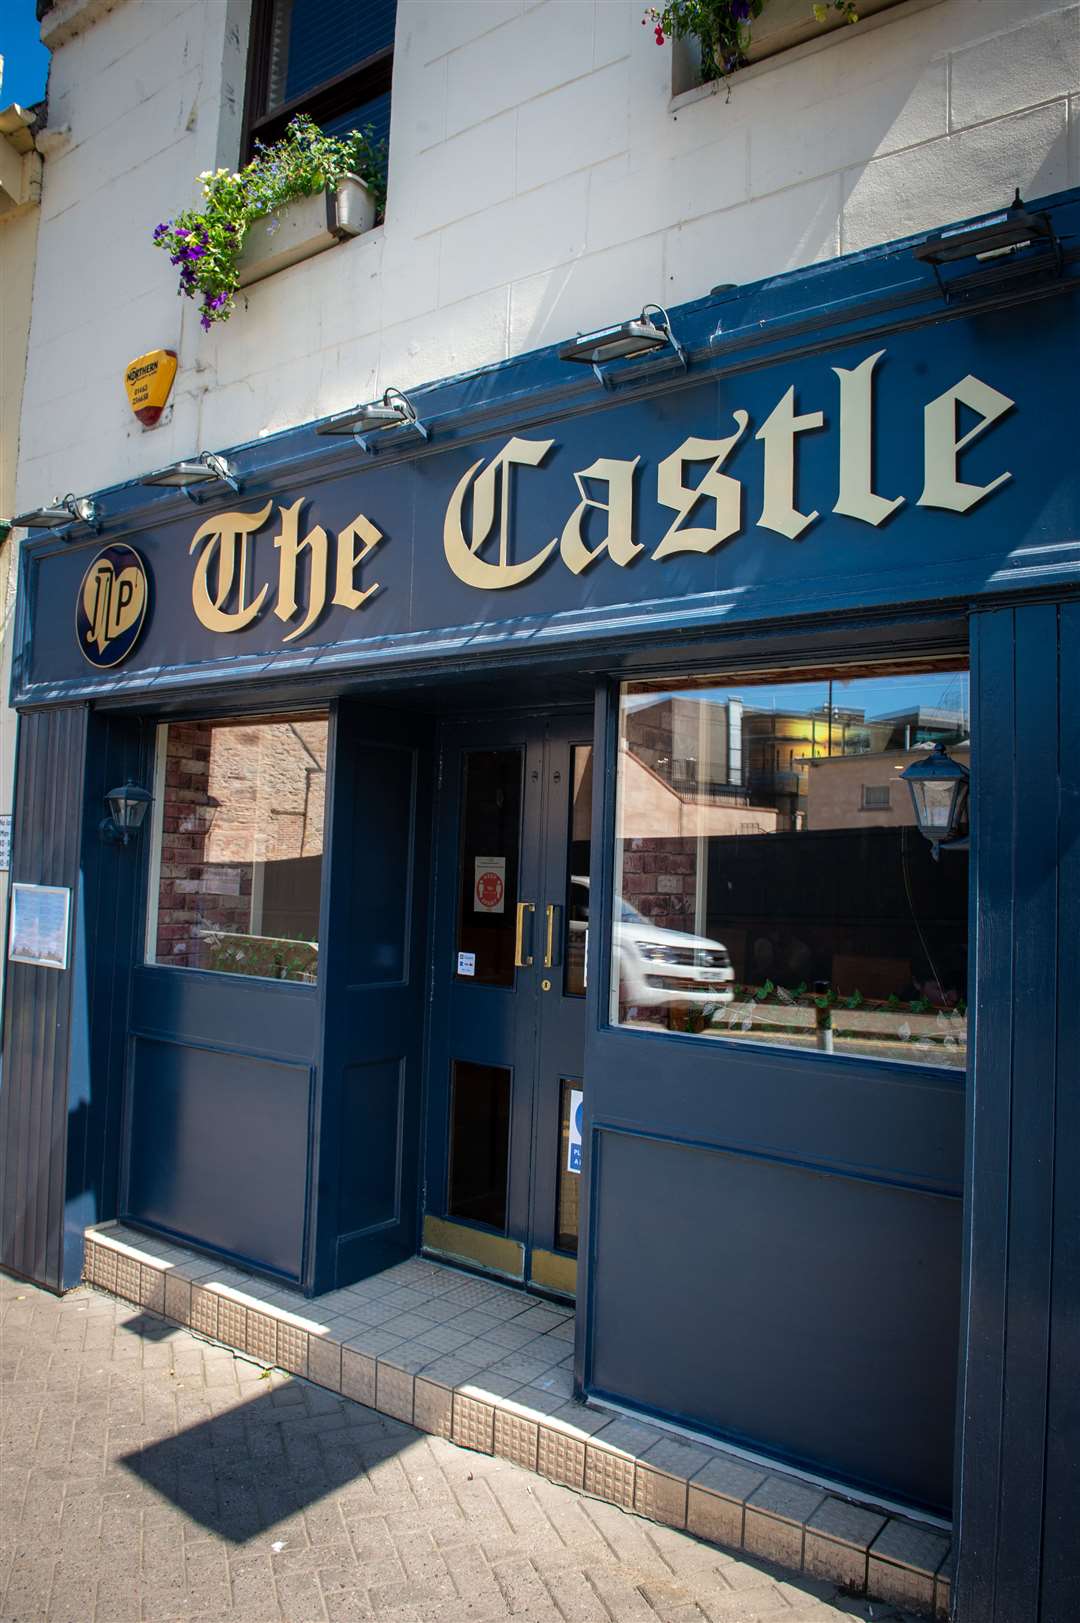 The Castle Restaurant first opened in the 1950s. Picture: Callum Mackay.